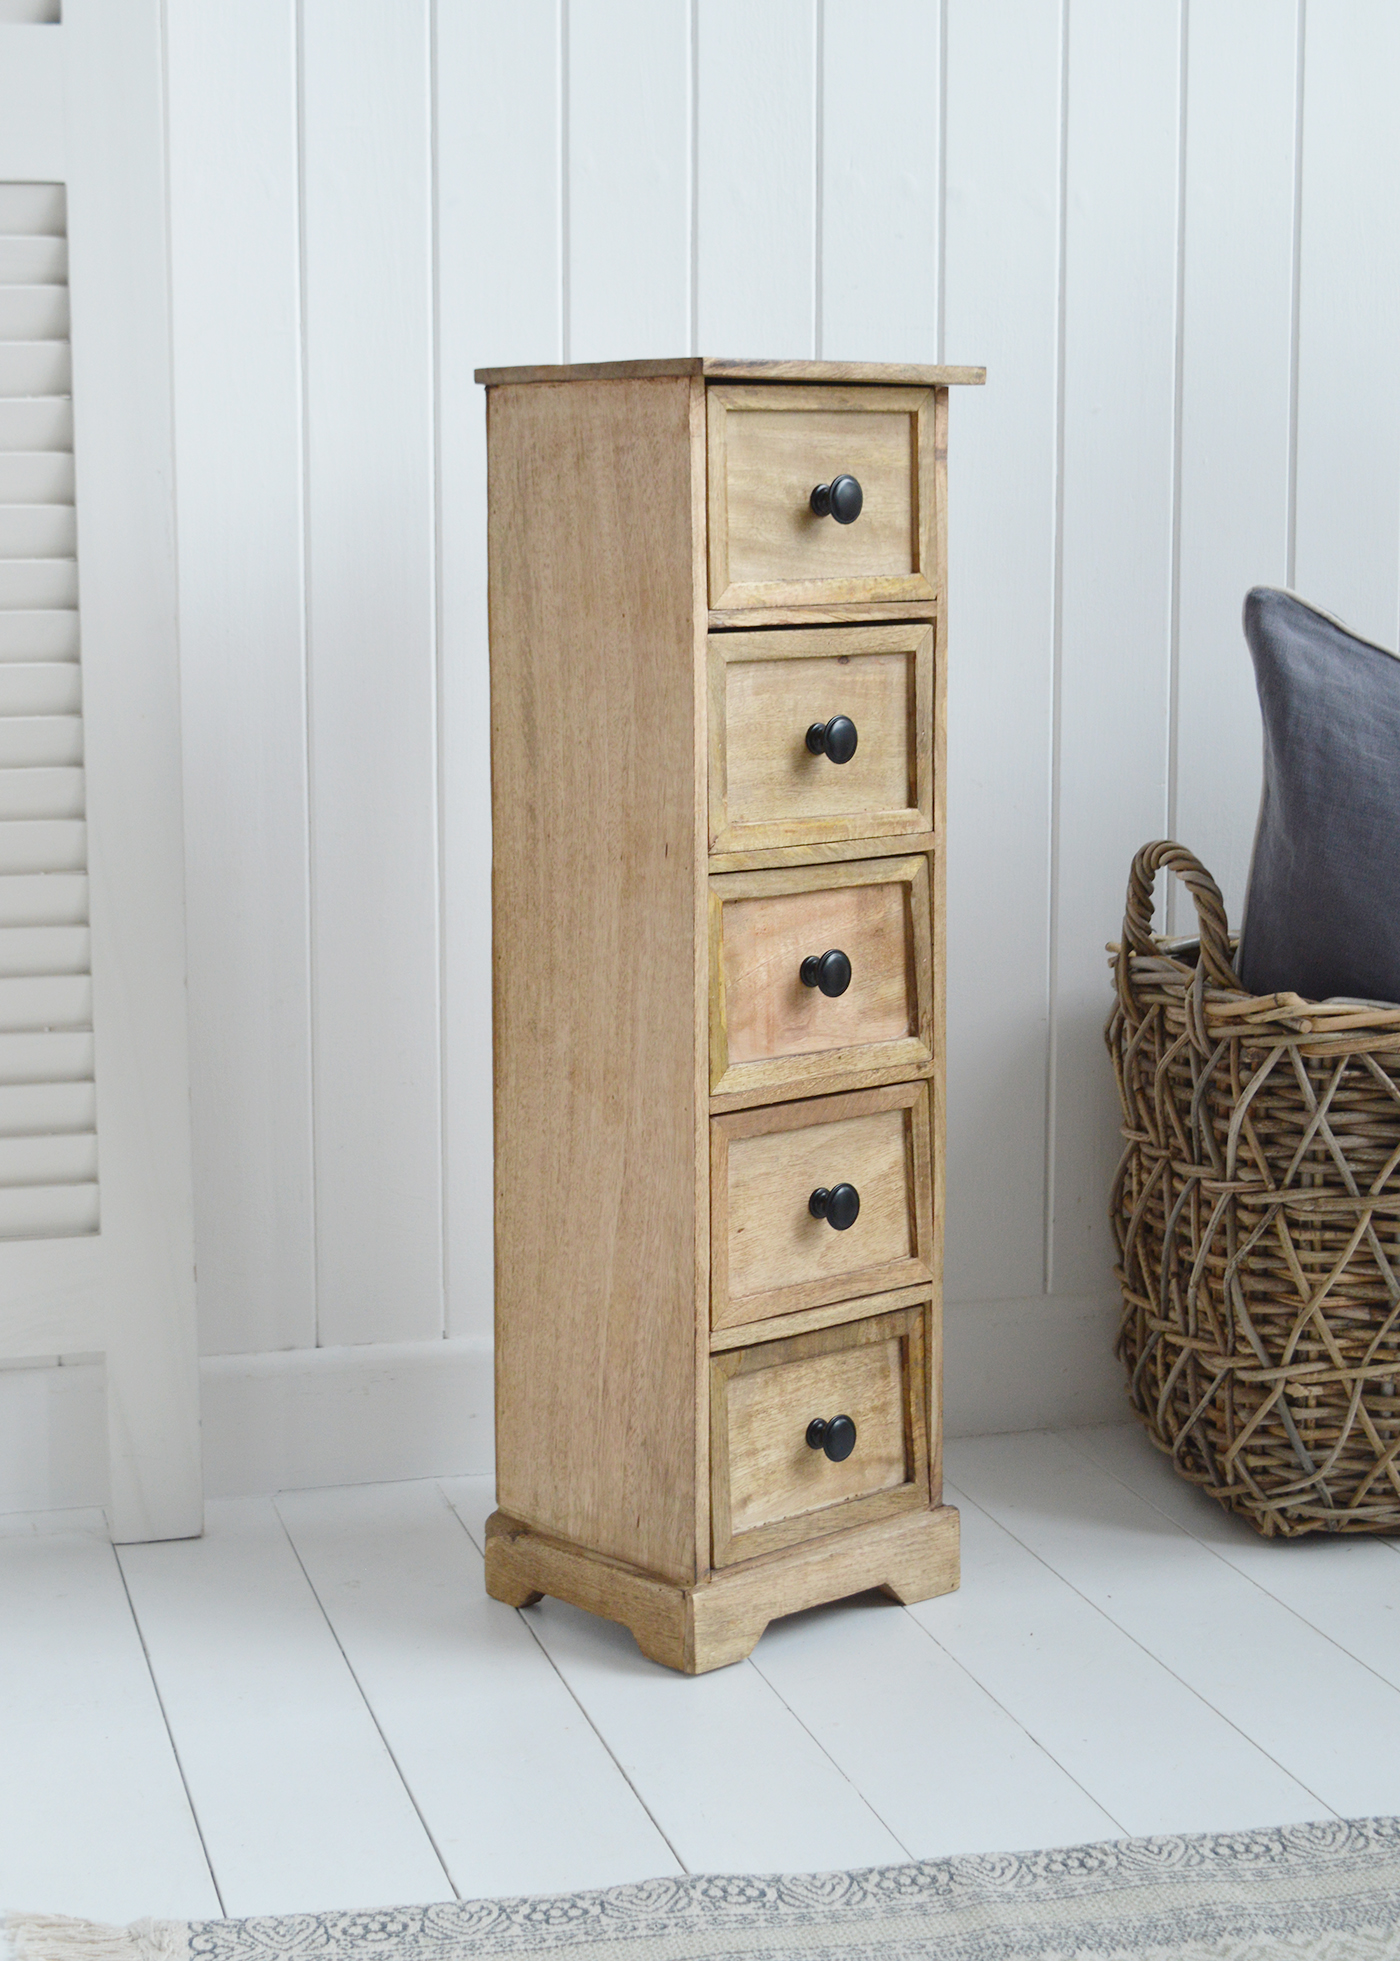 Dorser wooden bedside table, 23cm at the widest part, perfecr for narrow slim spaces beside the bed.